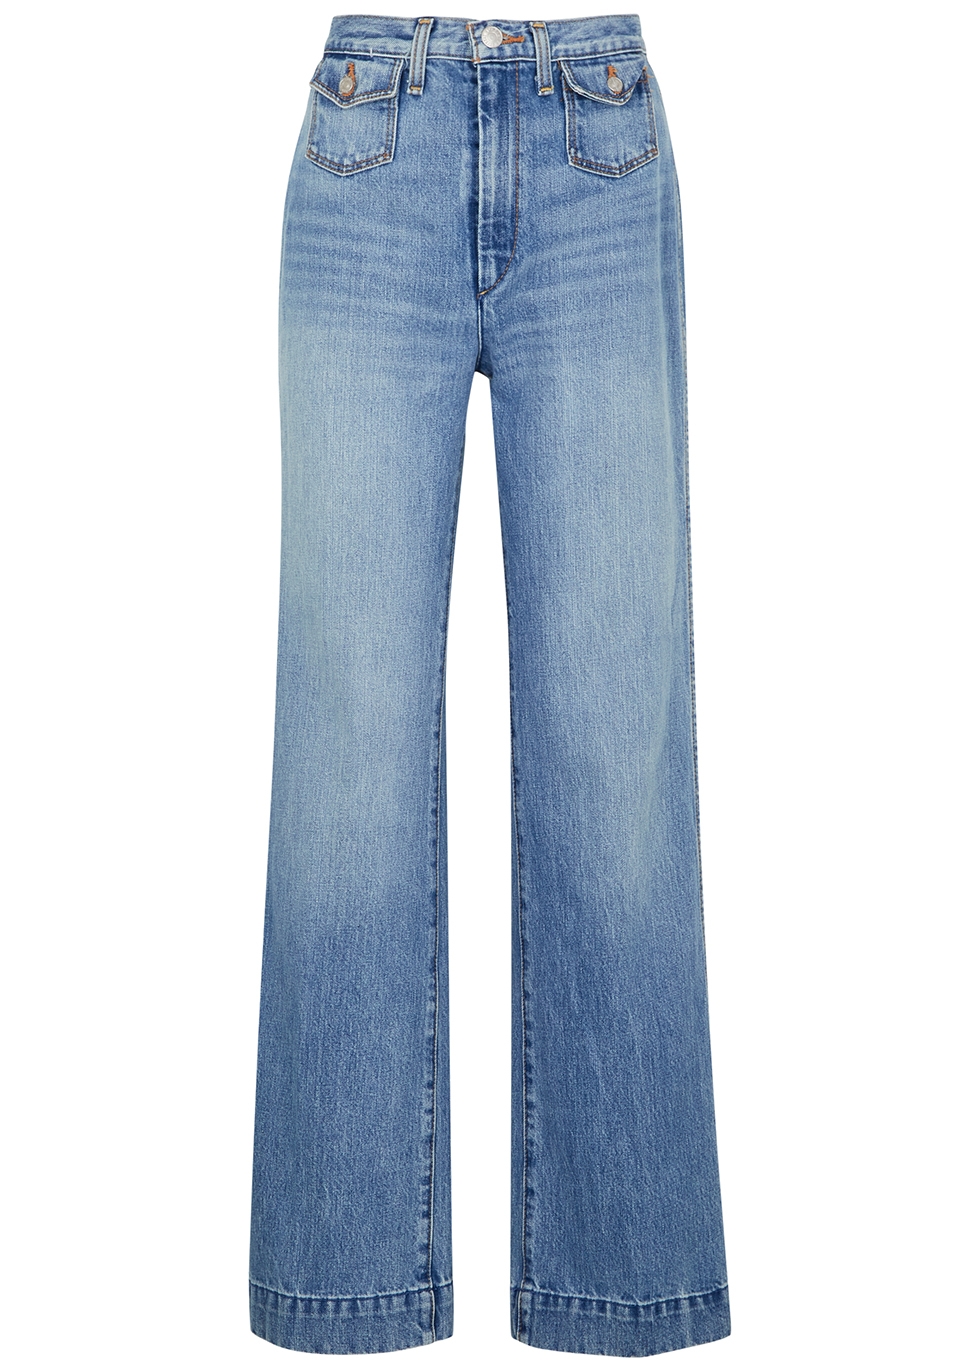 Save 11% Womens Jeans RE/DONE Jeans RE/DONE Denim Straight-leg Jeans in Blue 